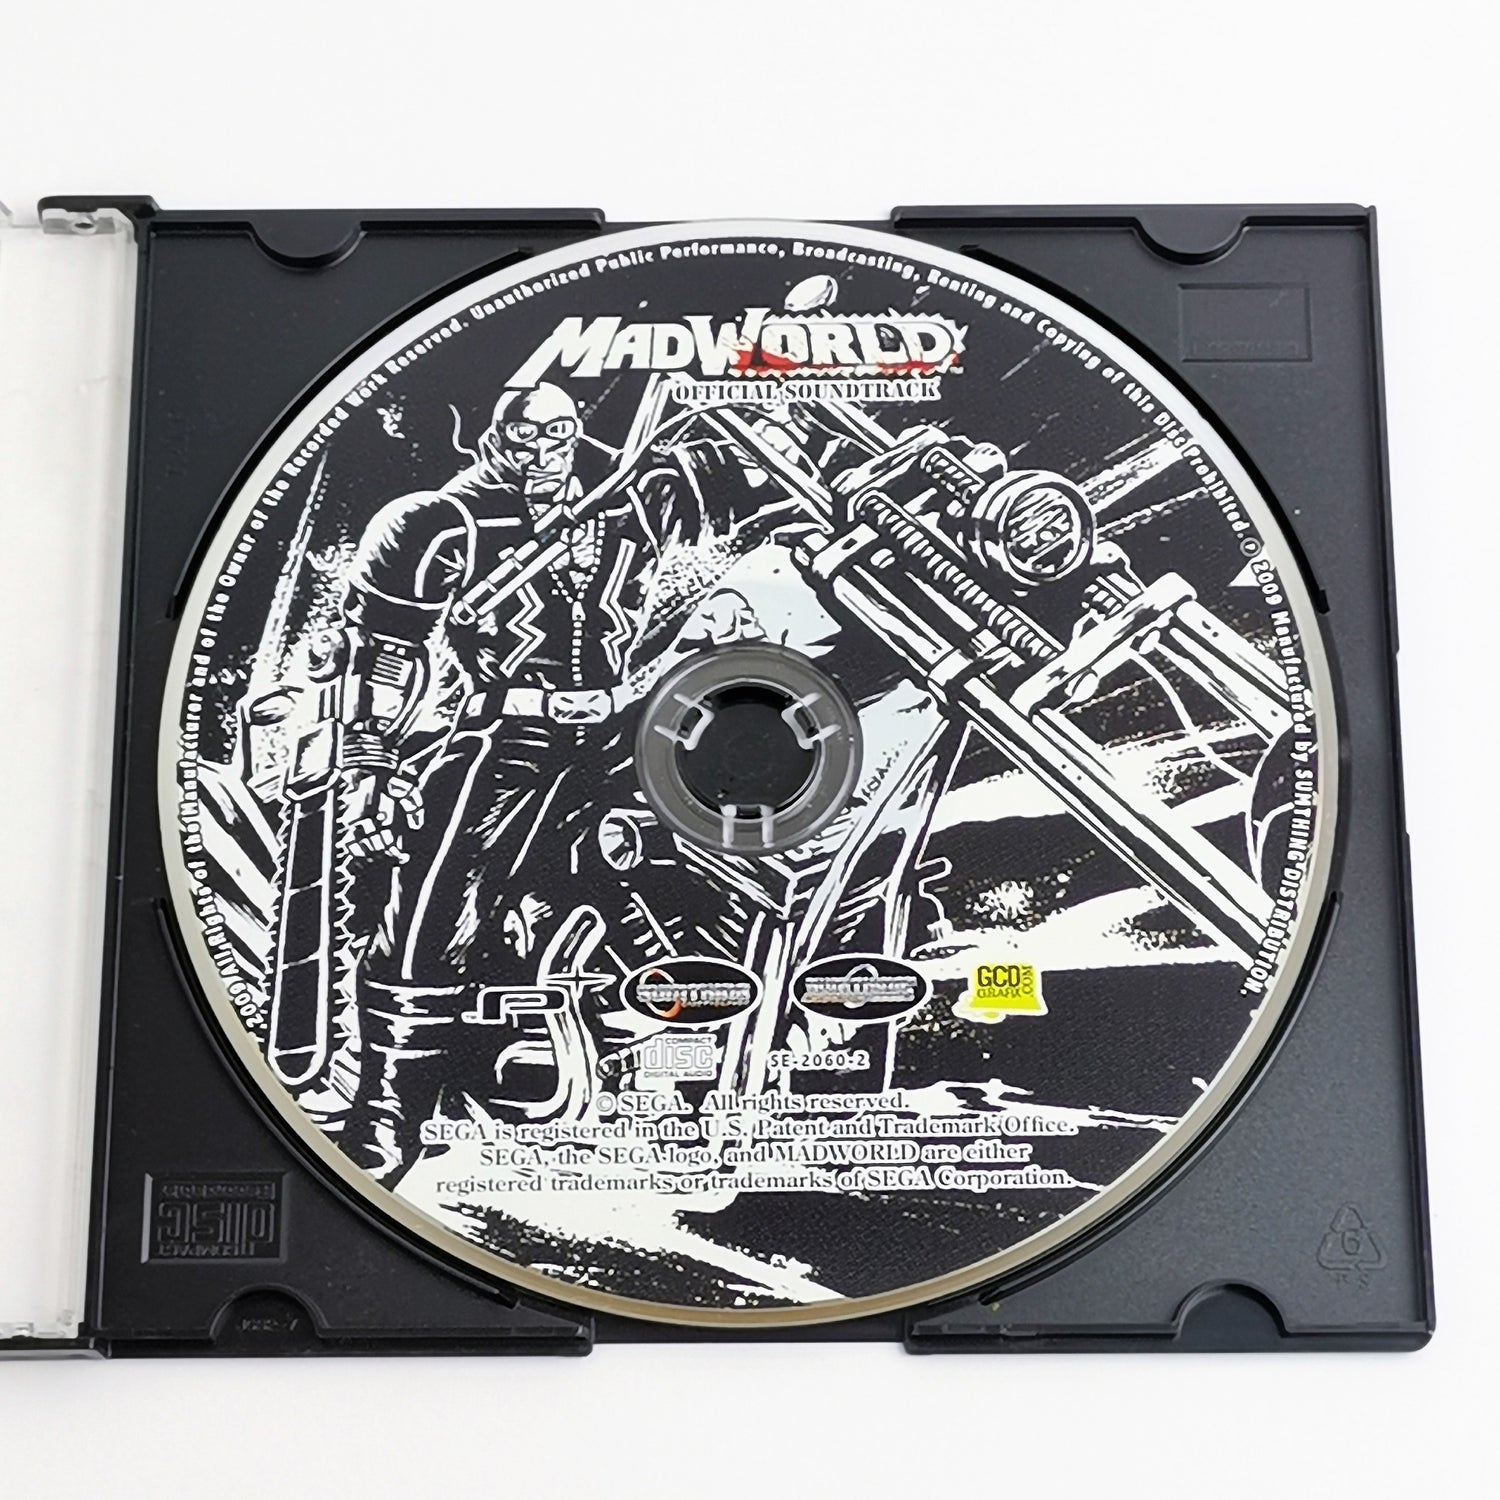 Audio soundtrack CD for the game: Mad World